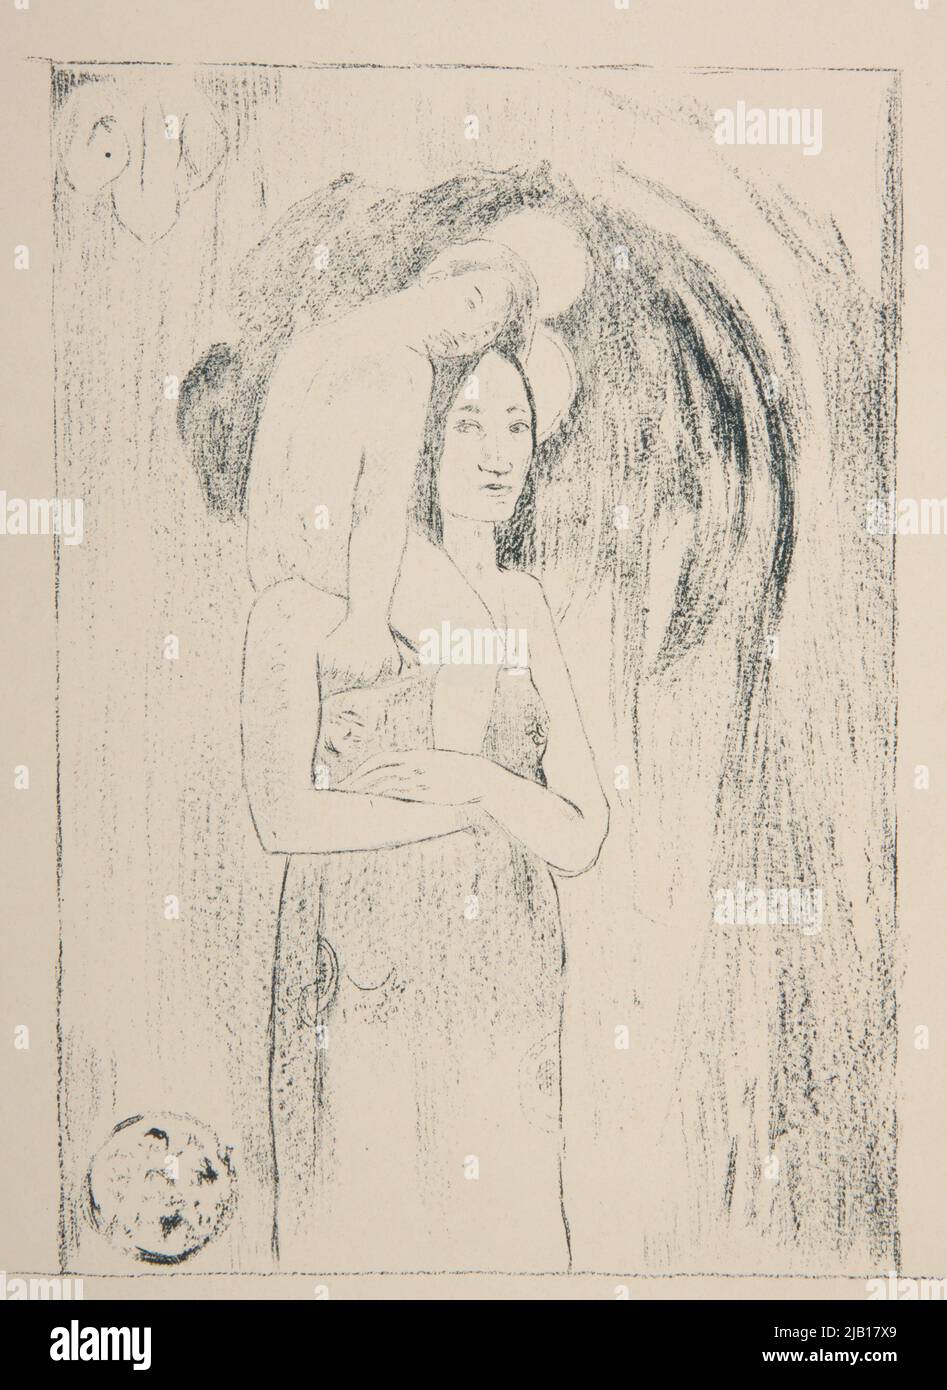 Two Prints of the Composition: Ia Oran Maria  I Salae, Marie  The Virgin and the Child / Ia Orana Maria  Hail Madonna with the Child  Pl. Z: L’Écreve, art album, no 4, March 1895 Gauguin, Paul (1848 1903) Stock Photo